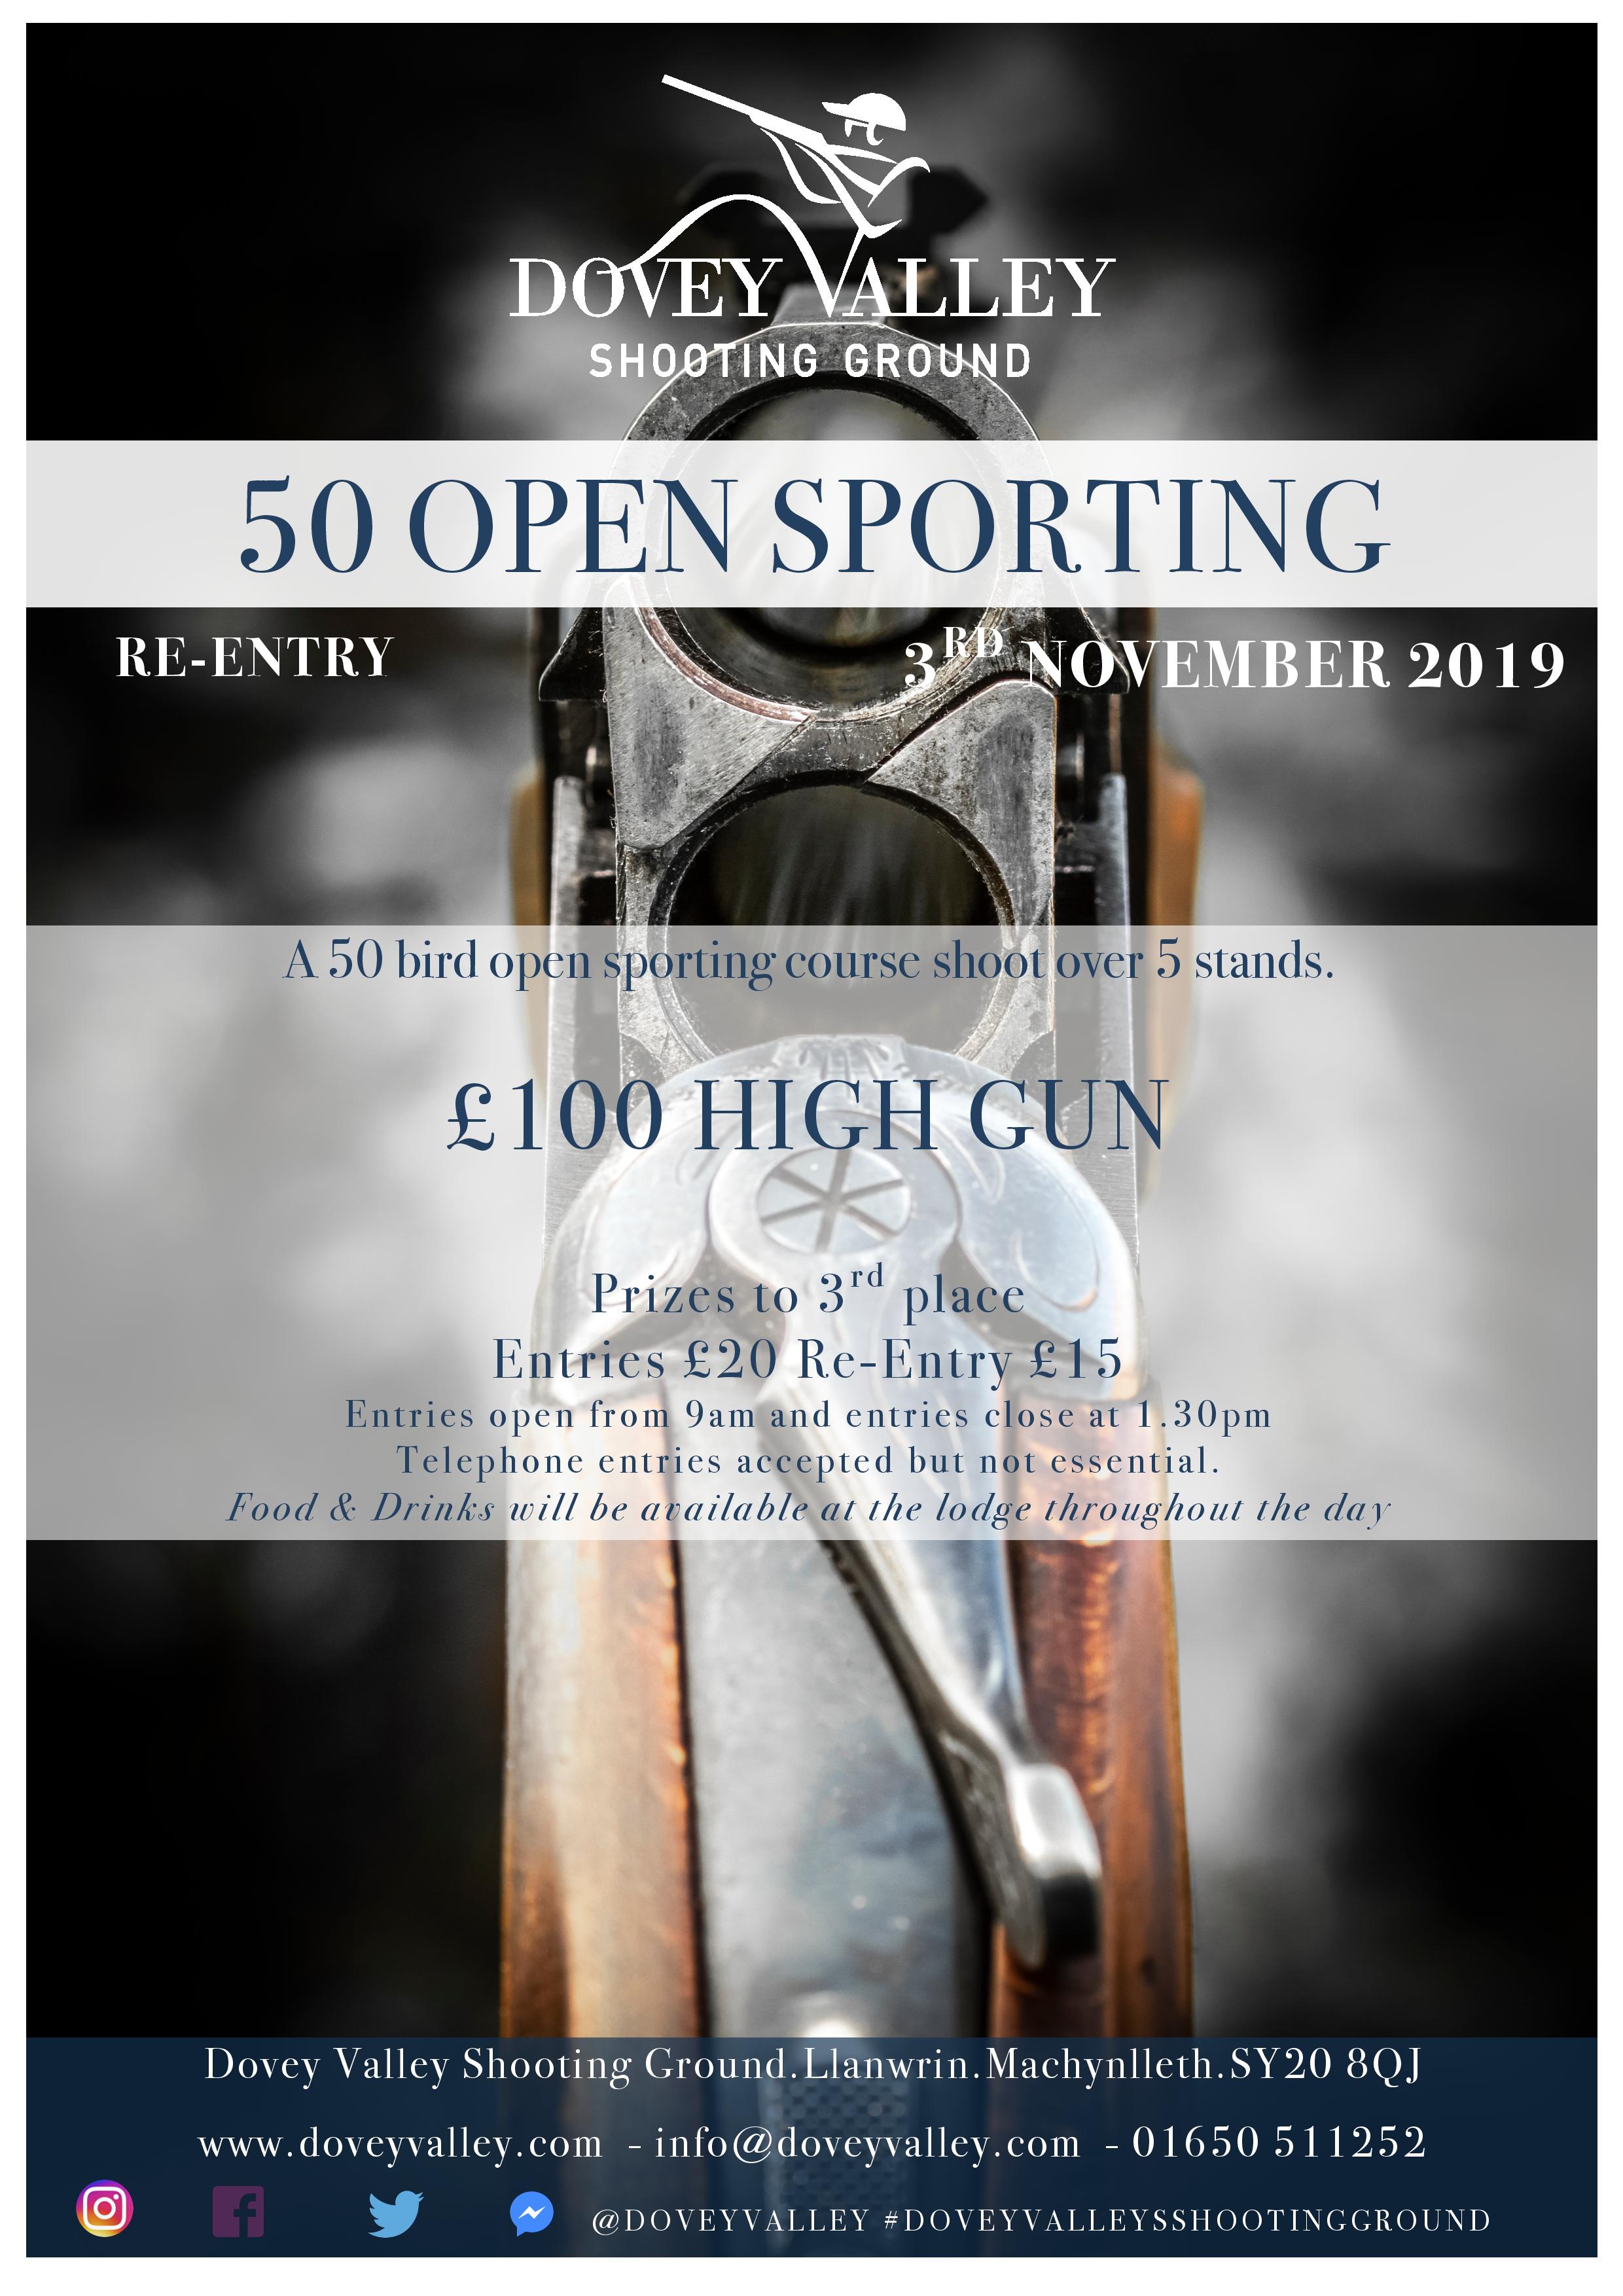 OUR FIRST COMPETITION ’50 BIRD OPEN SPORTING’